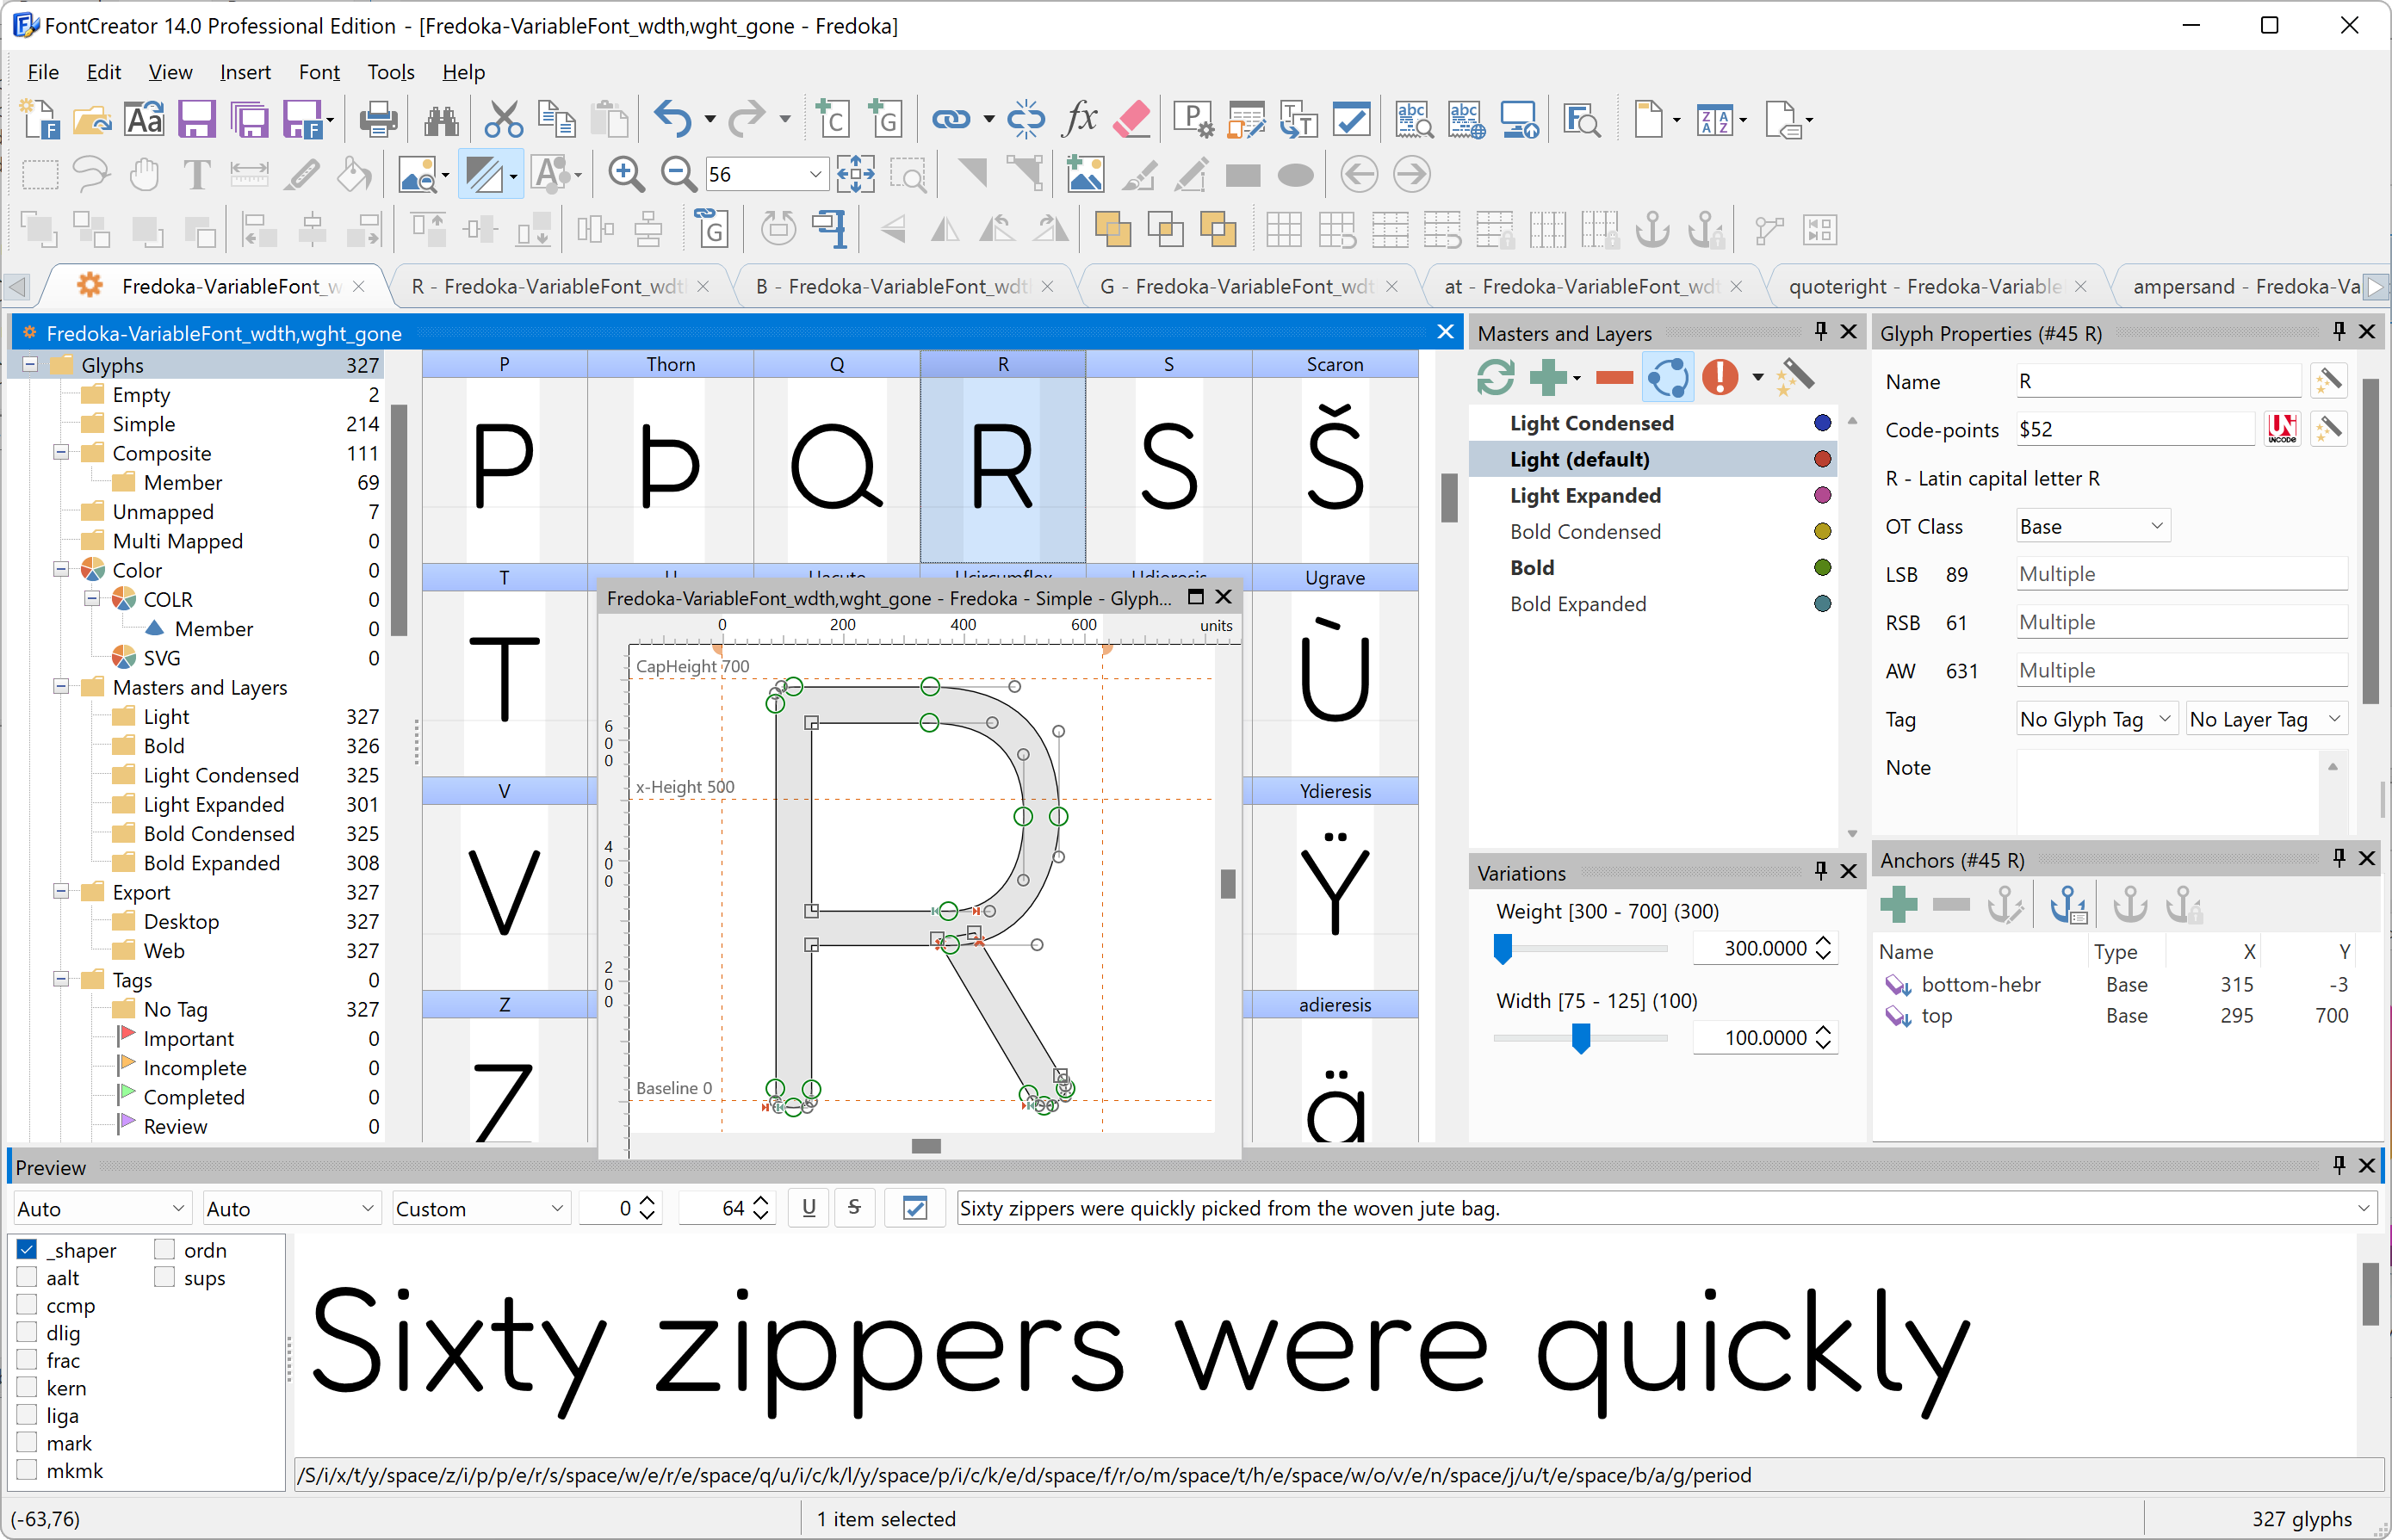 FontCreator is the most popular font editor for Windows